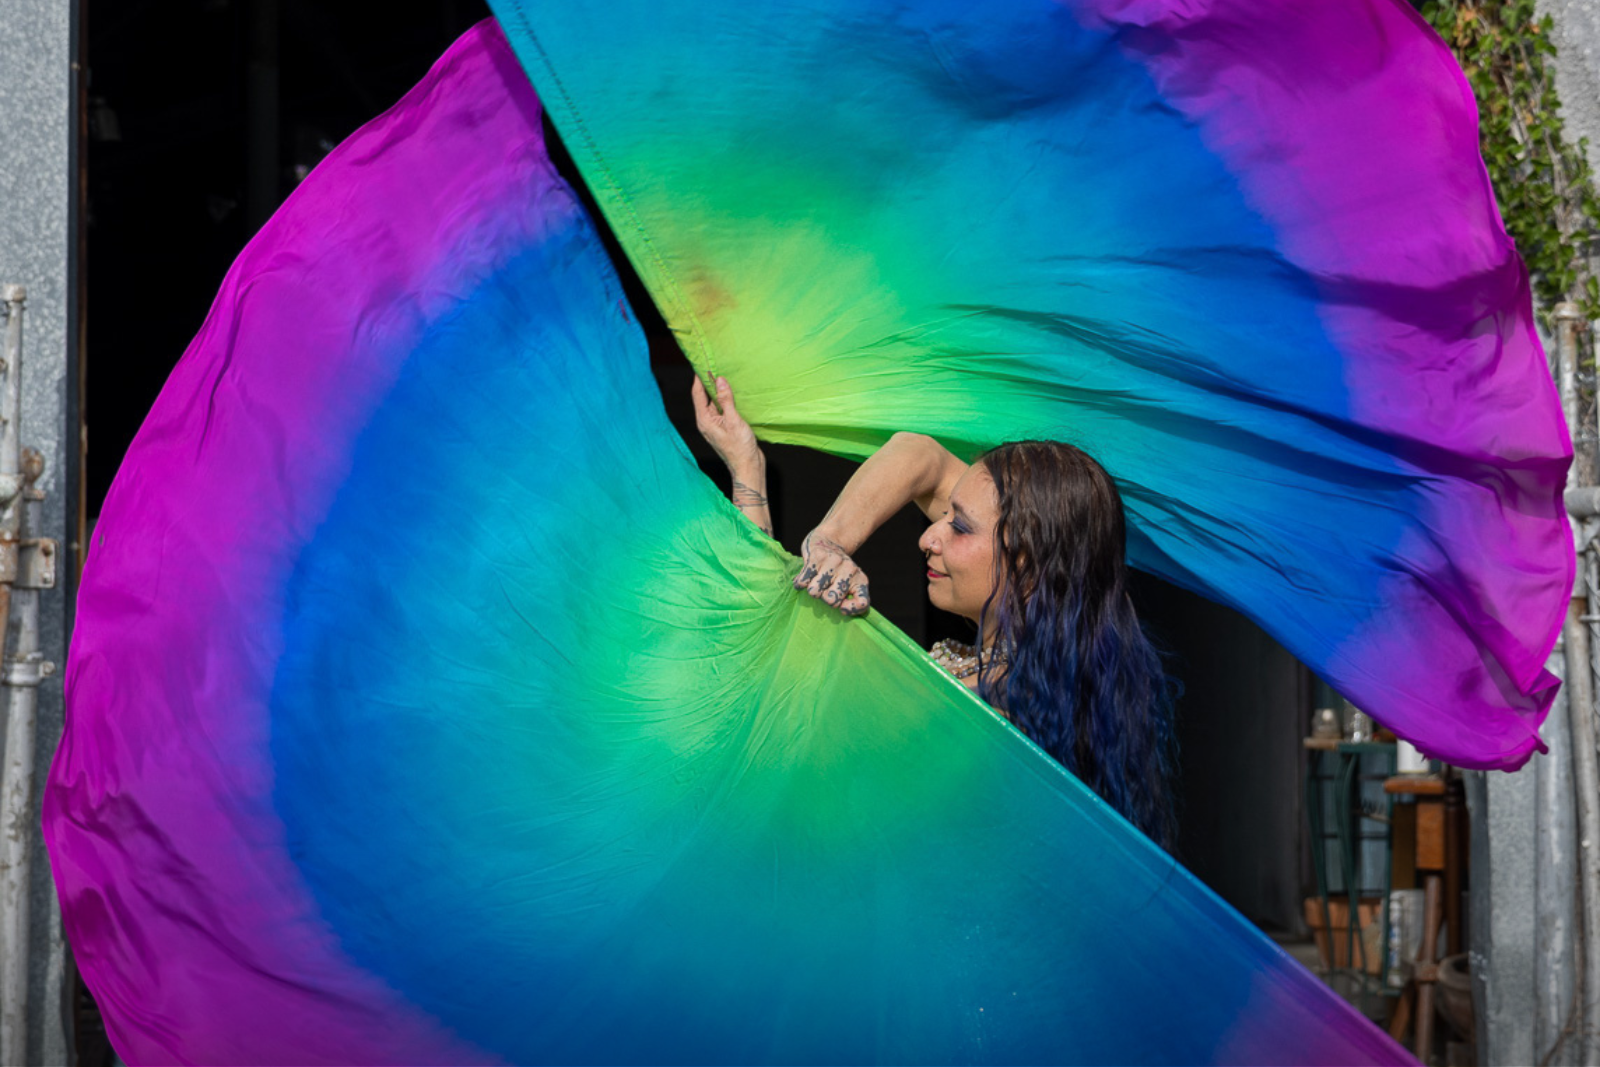 Woman swings large purple blue and green fabric in a circle.